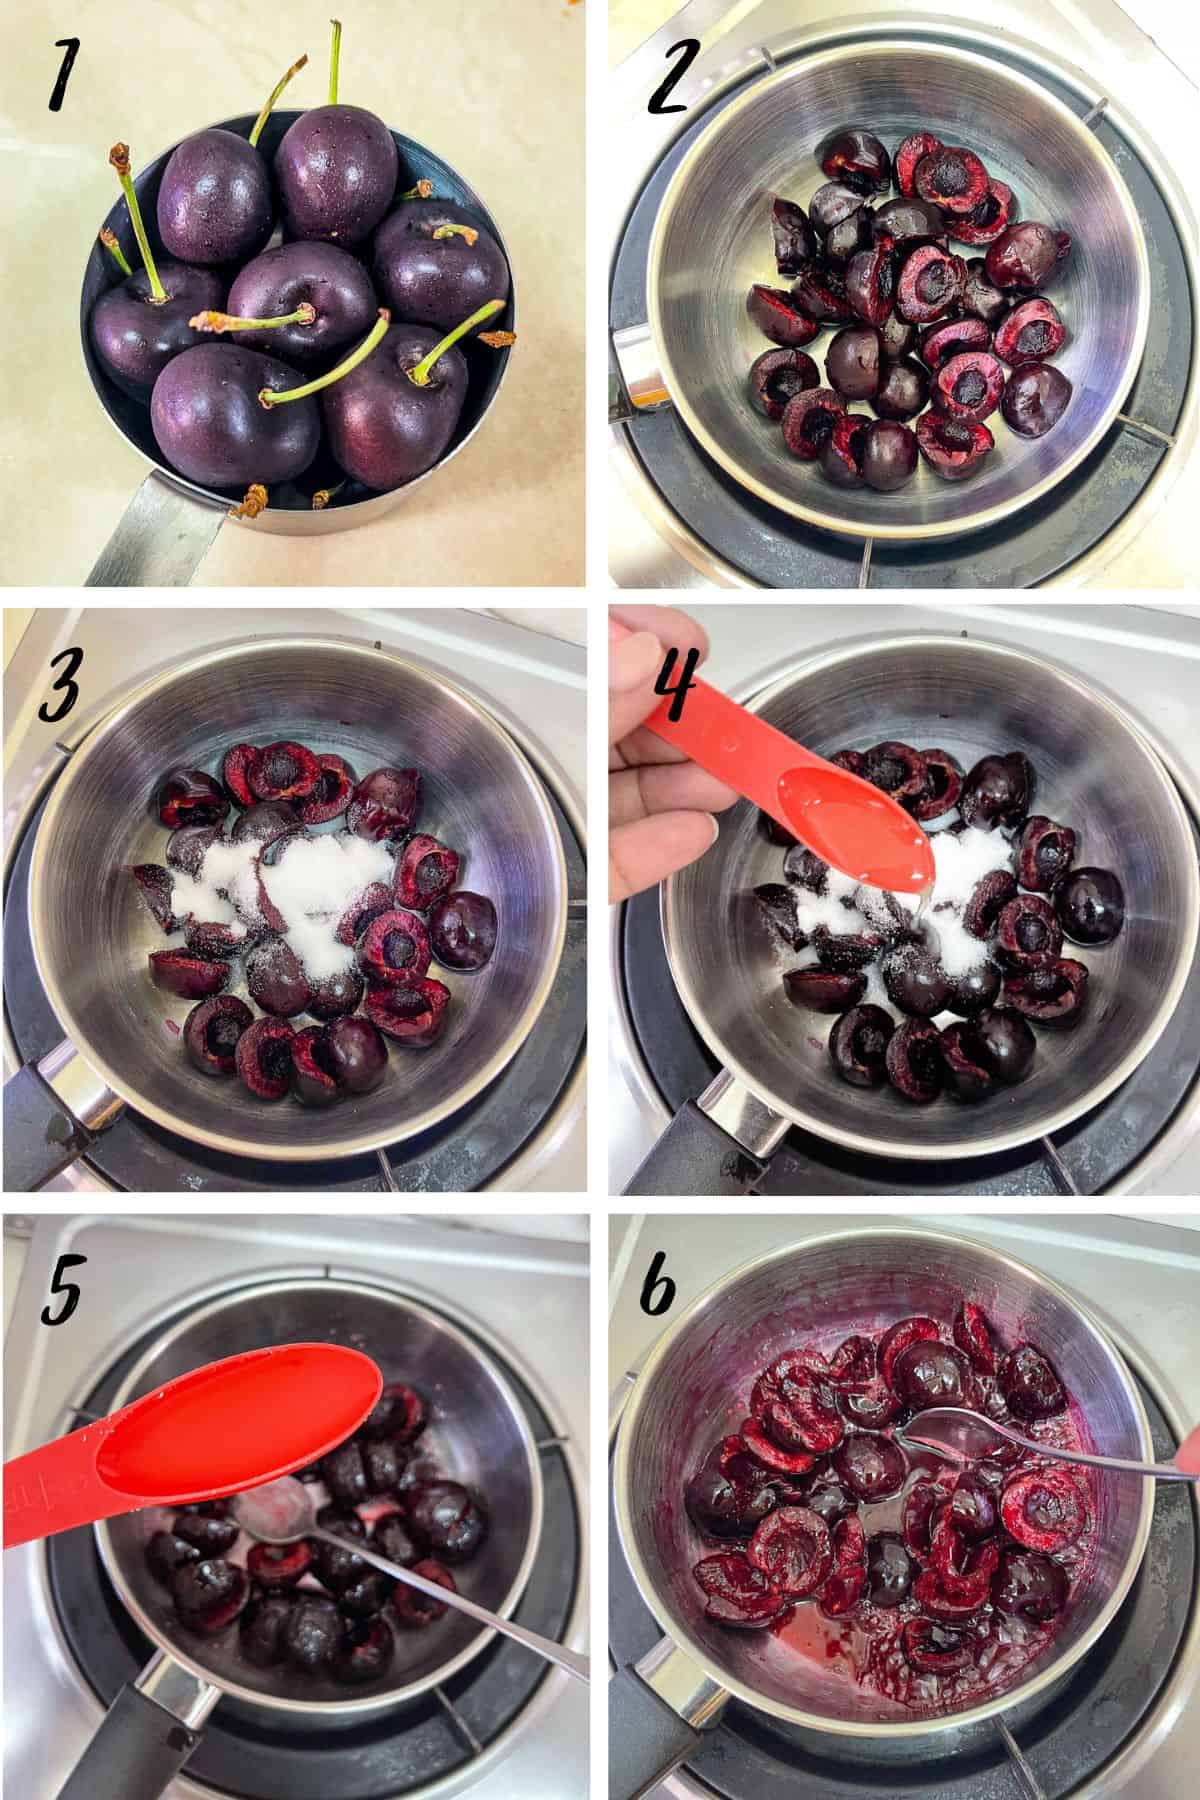 A poster of 6 images showing how to cook cherries to make cherry coulis.